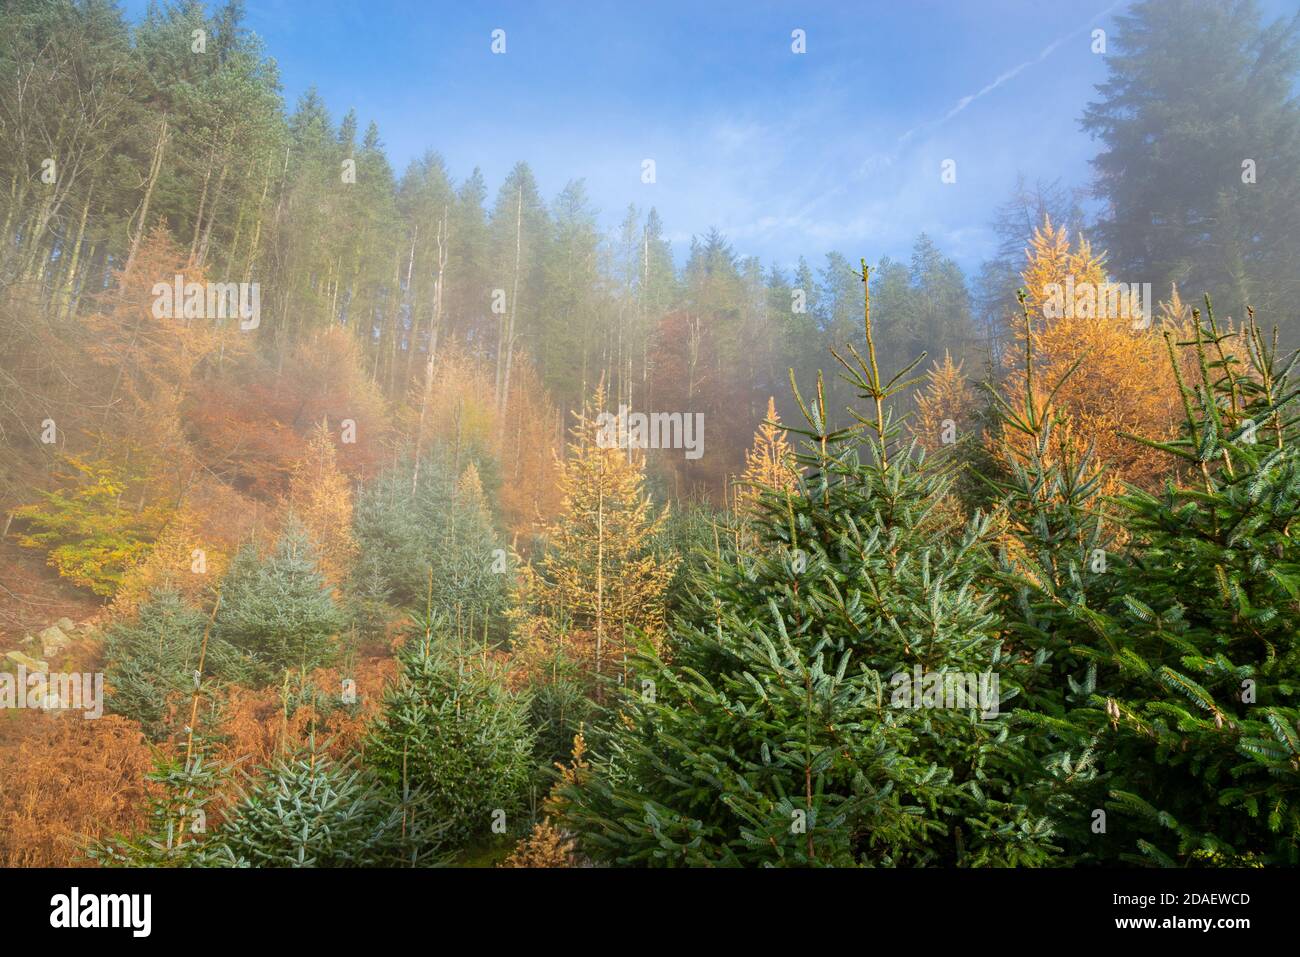 Bright autumn colour in forest trees at Snake Woodlands, Peak District, Derbyshire, England. Stock Photo